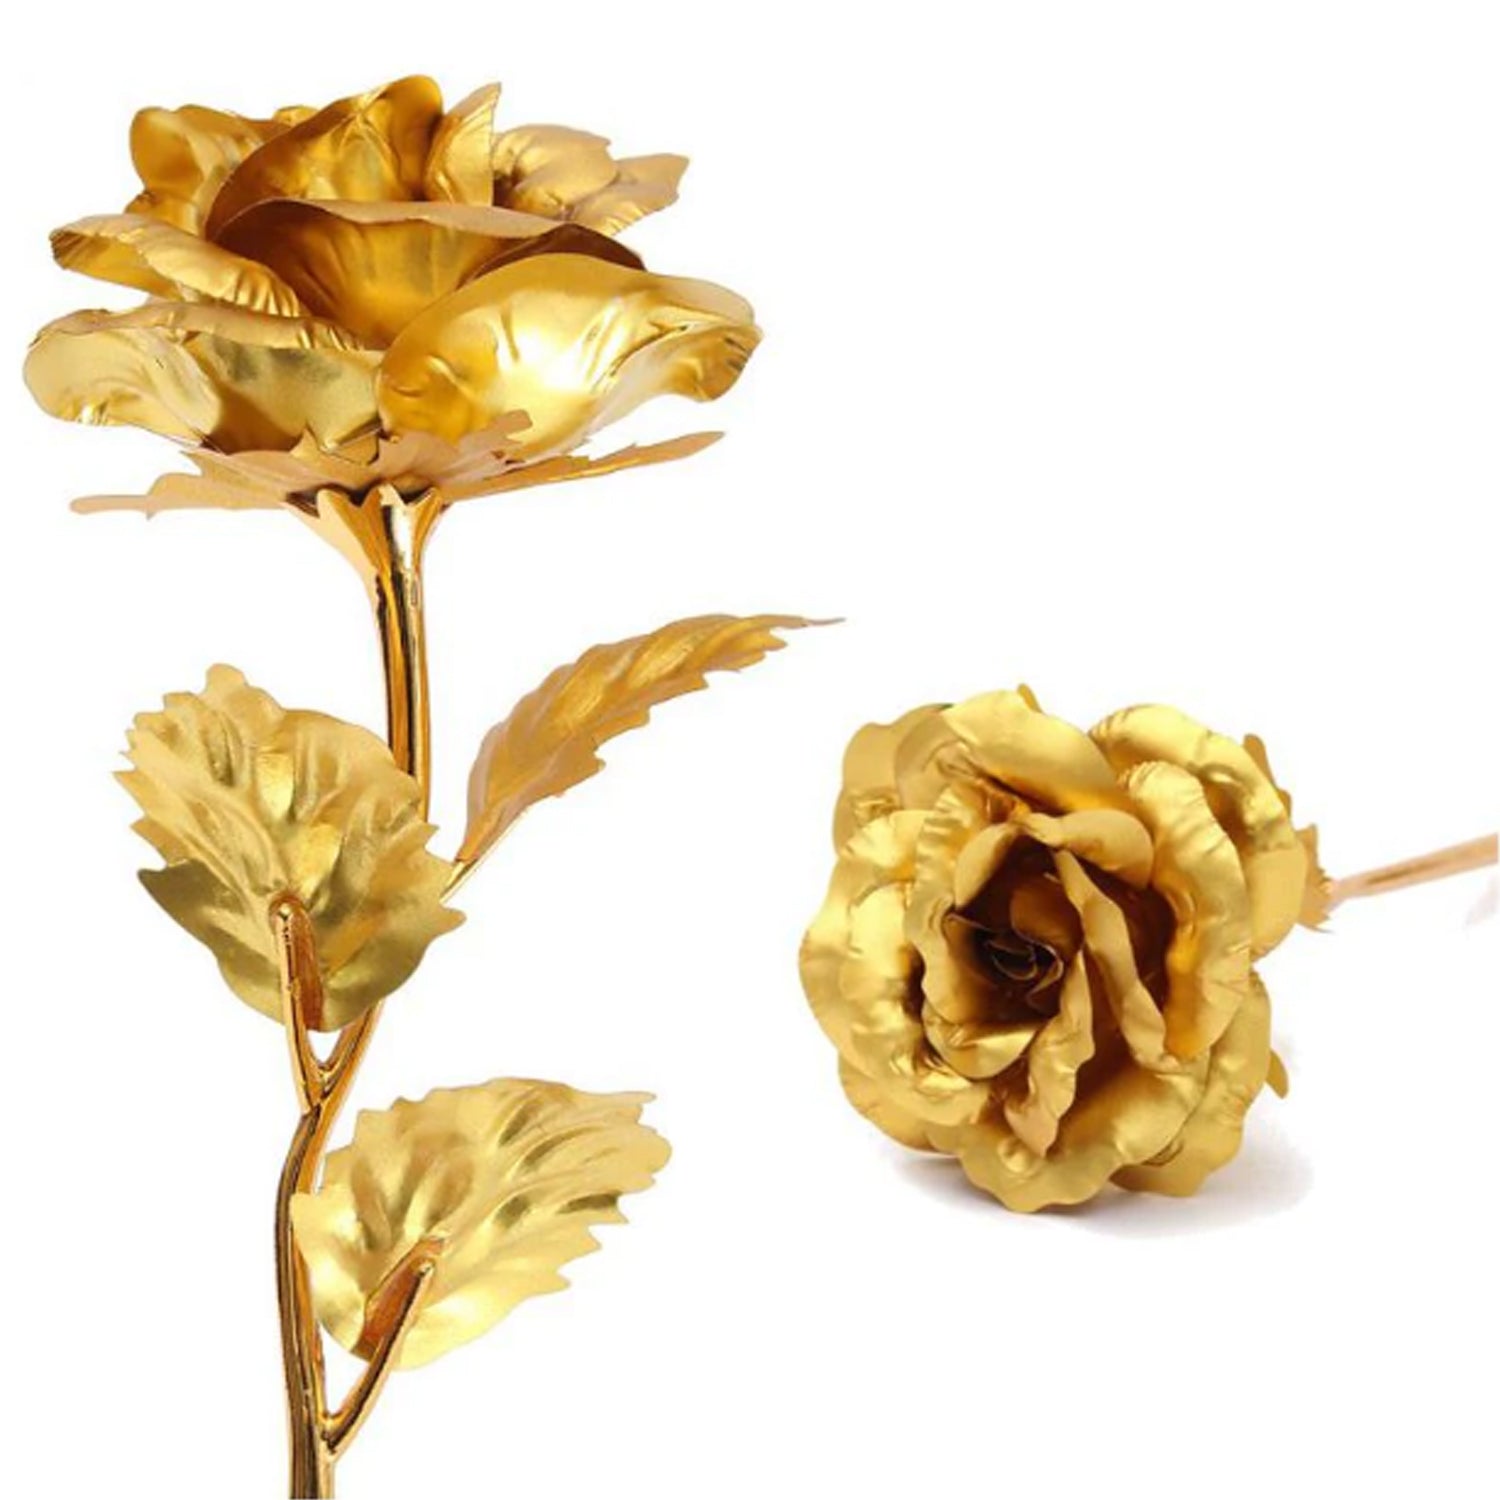 0879 B Golden Rose used in all kinds of places like household, offices, cafe's, etc. for decorating and to look good purposes and all.